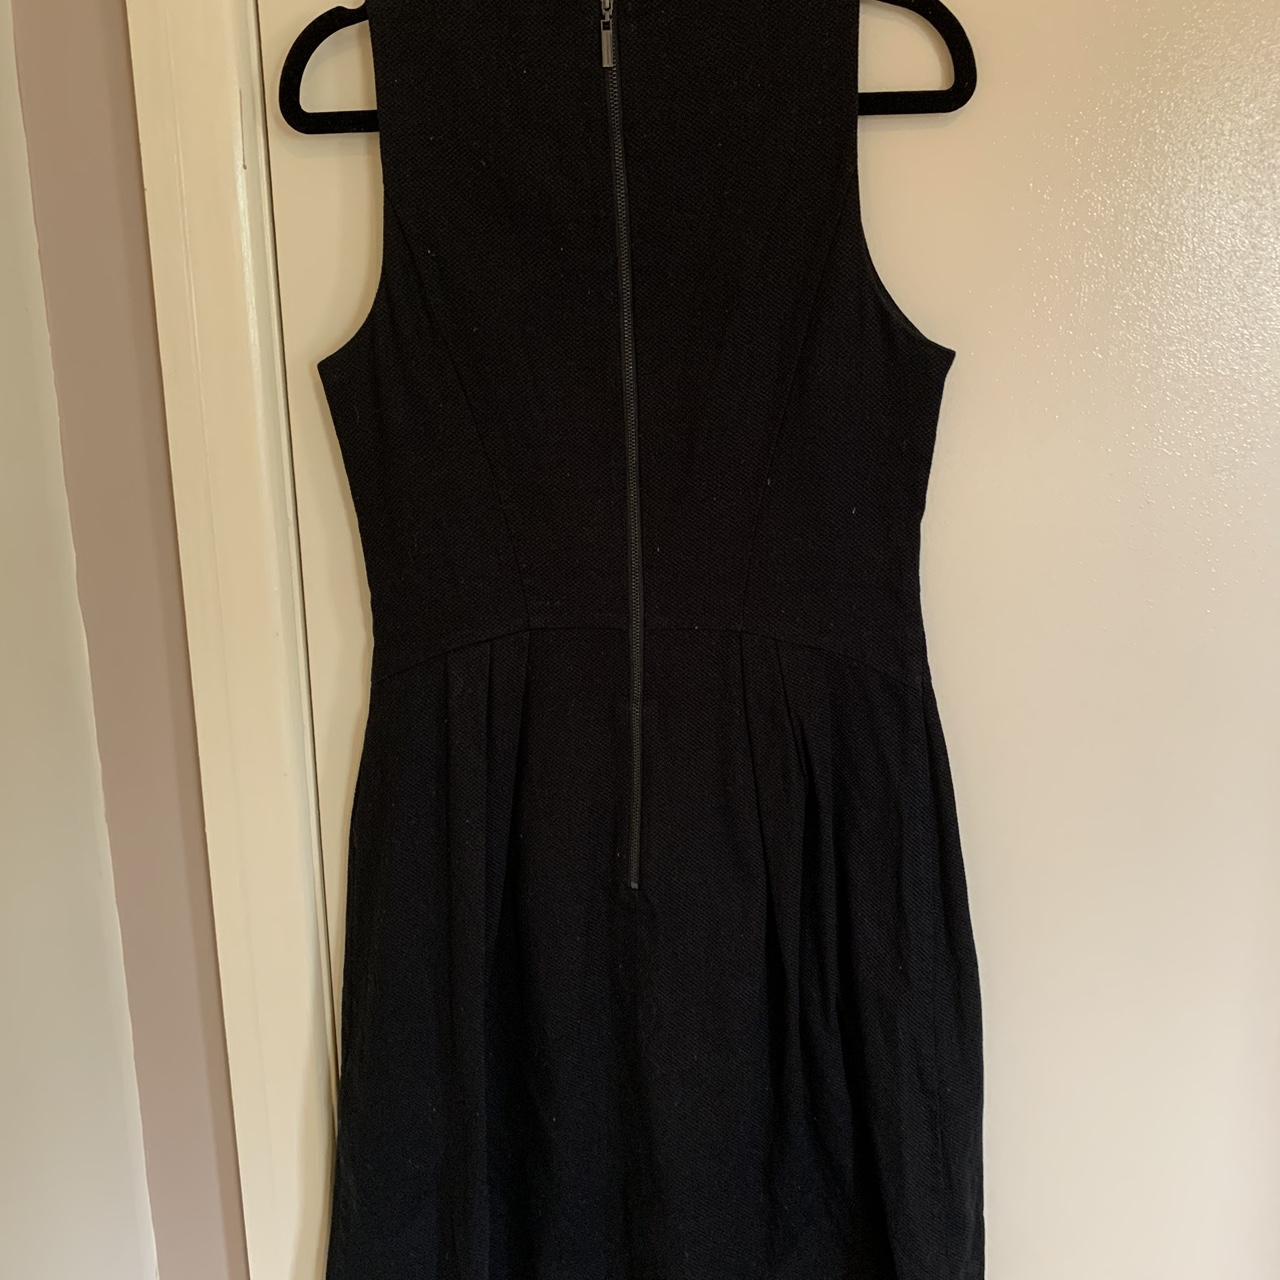 Cue City work dress size 10 Fitted at the top and... - Depop